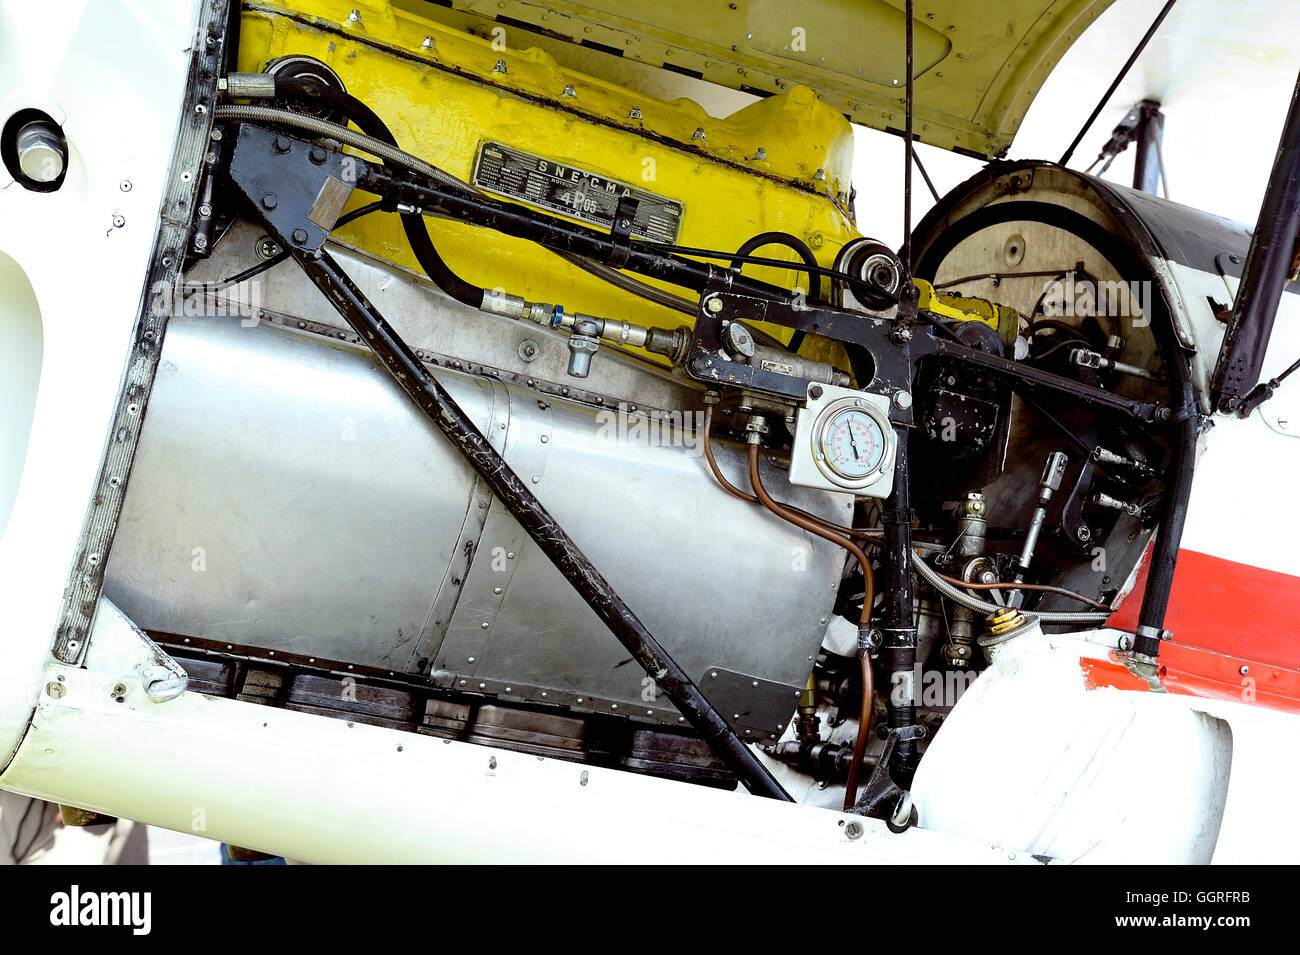 Detail of an engine of an old biplane Stampe on the Mende airfield in the French department of Gard Stock Photo